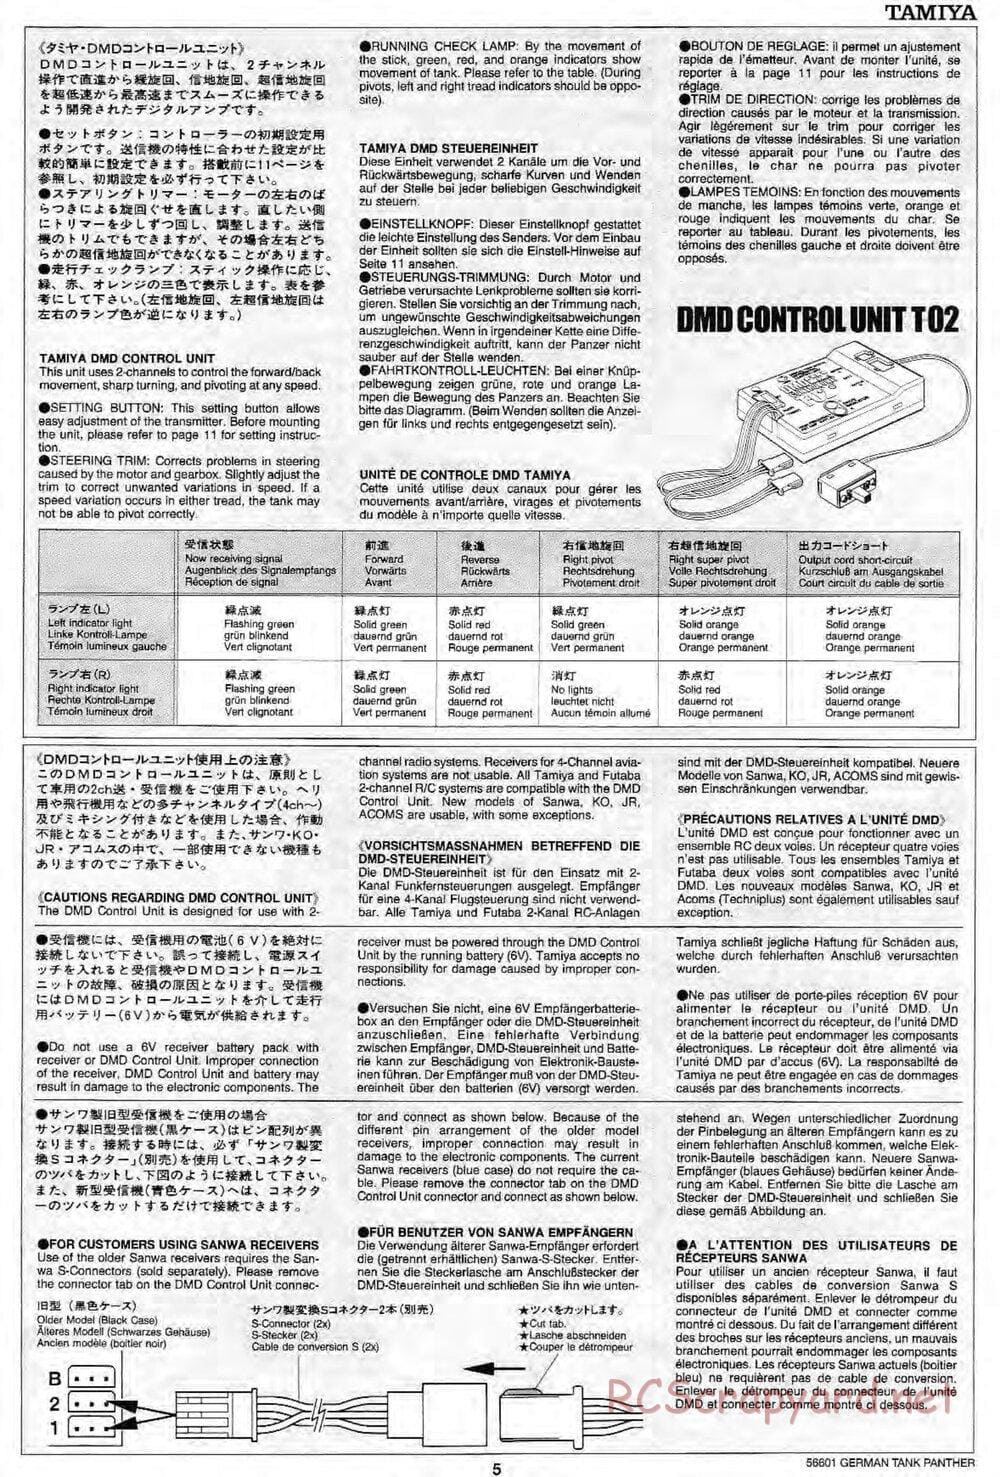 Tamiya - German Tank Panther A - 1/25 Scale Chassis - Manual - Page 5